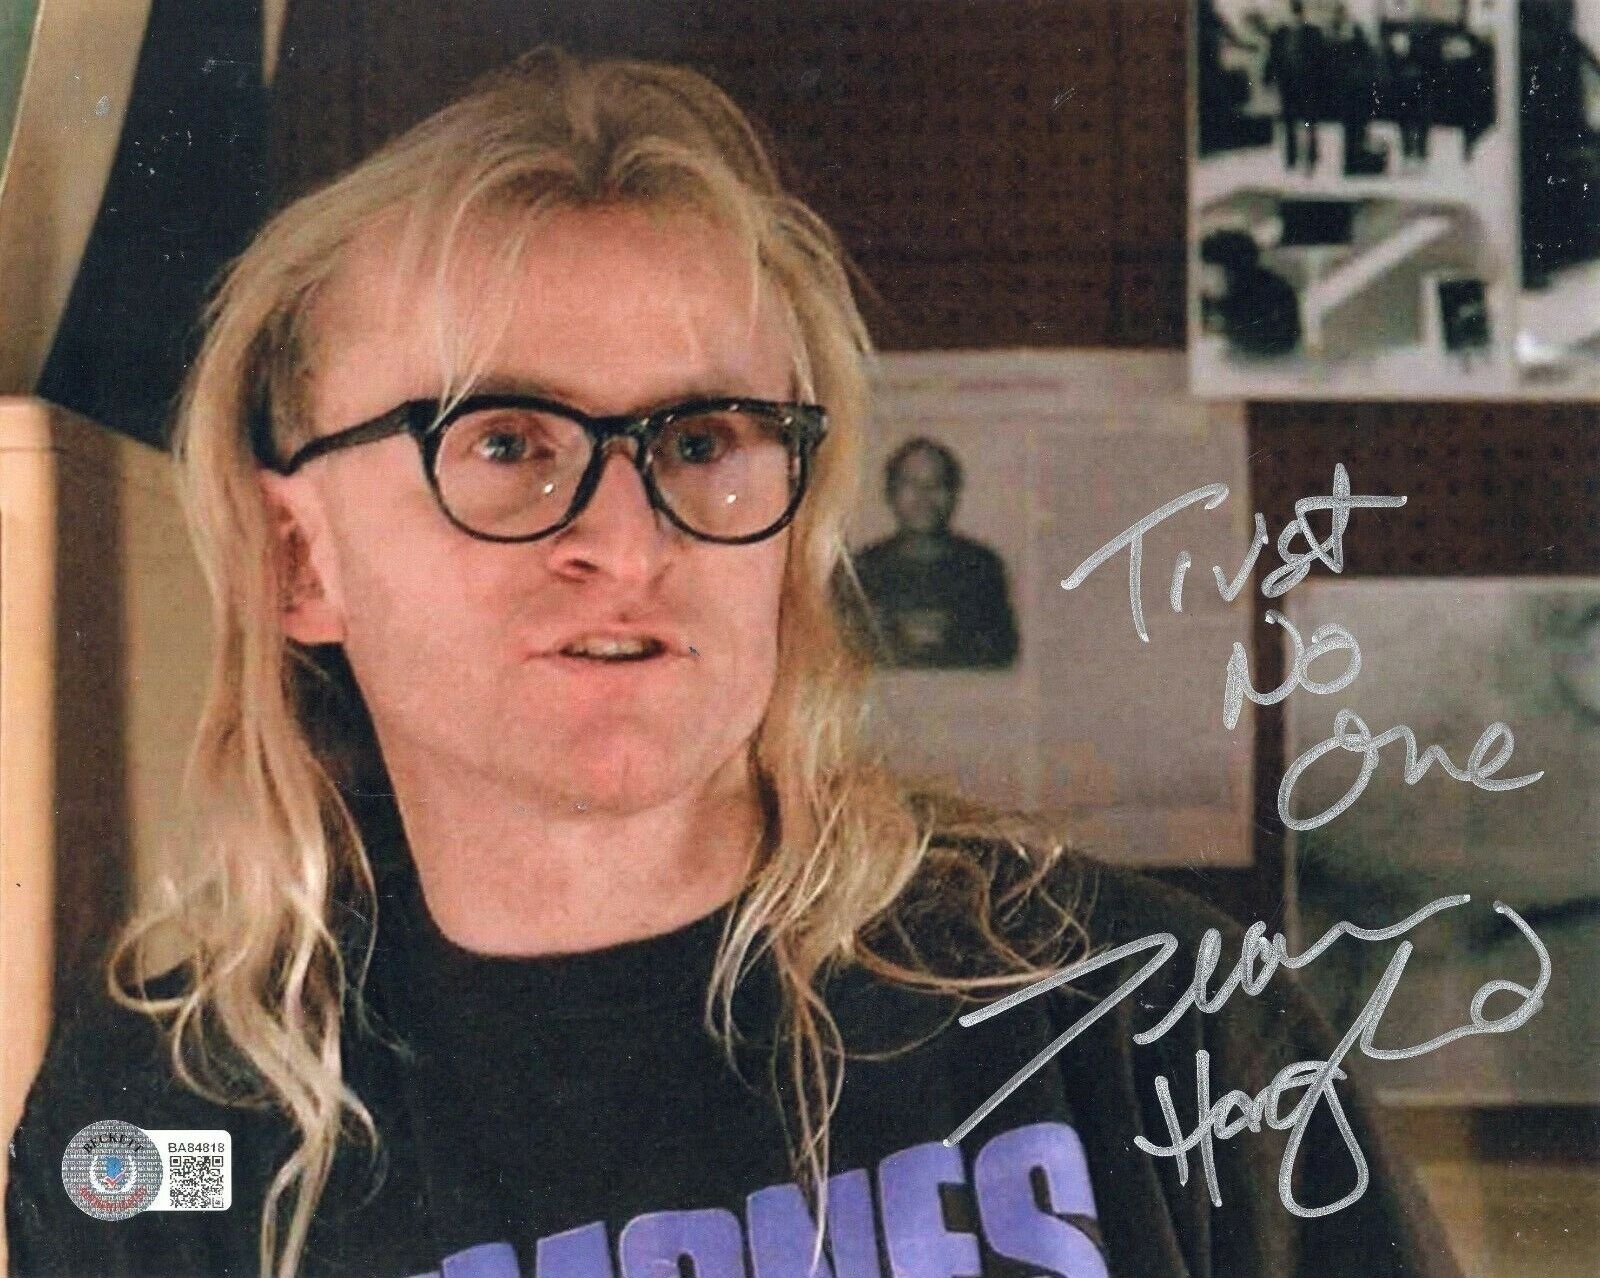 Dean Haglund Signed The X Files 8x10 Photo Poster painting w/Beckett COA BA84818 Richard Langly